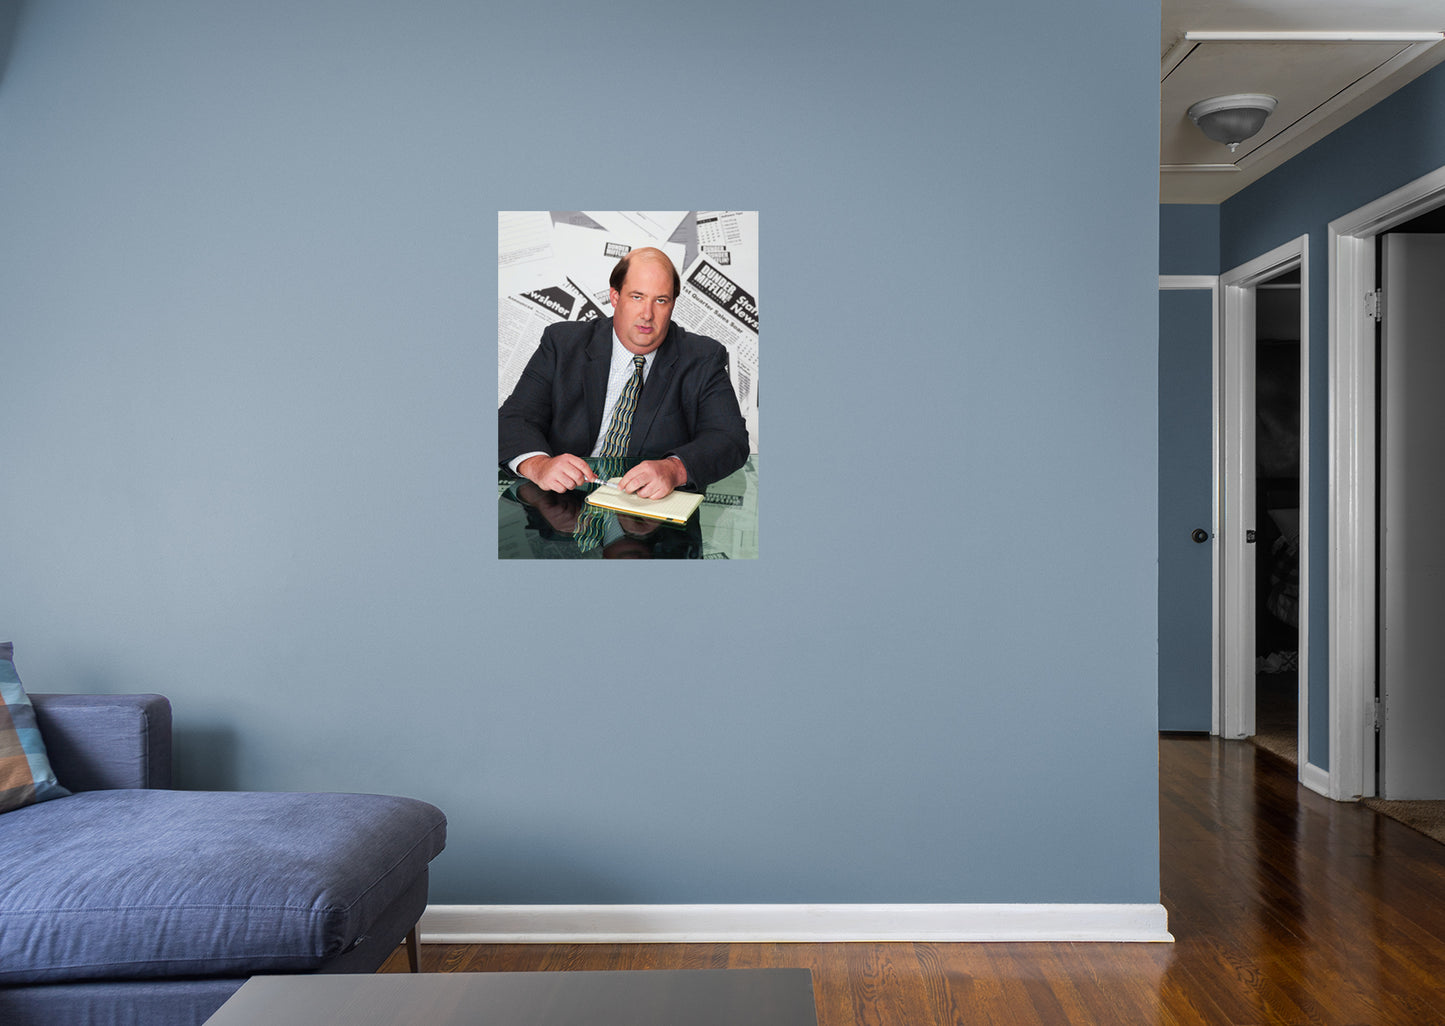 The Office: Kevin Mural        - Officially Licensed NBC Universal Removable Wall   Adhesive Decal